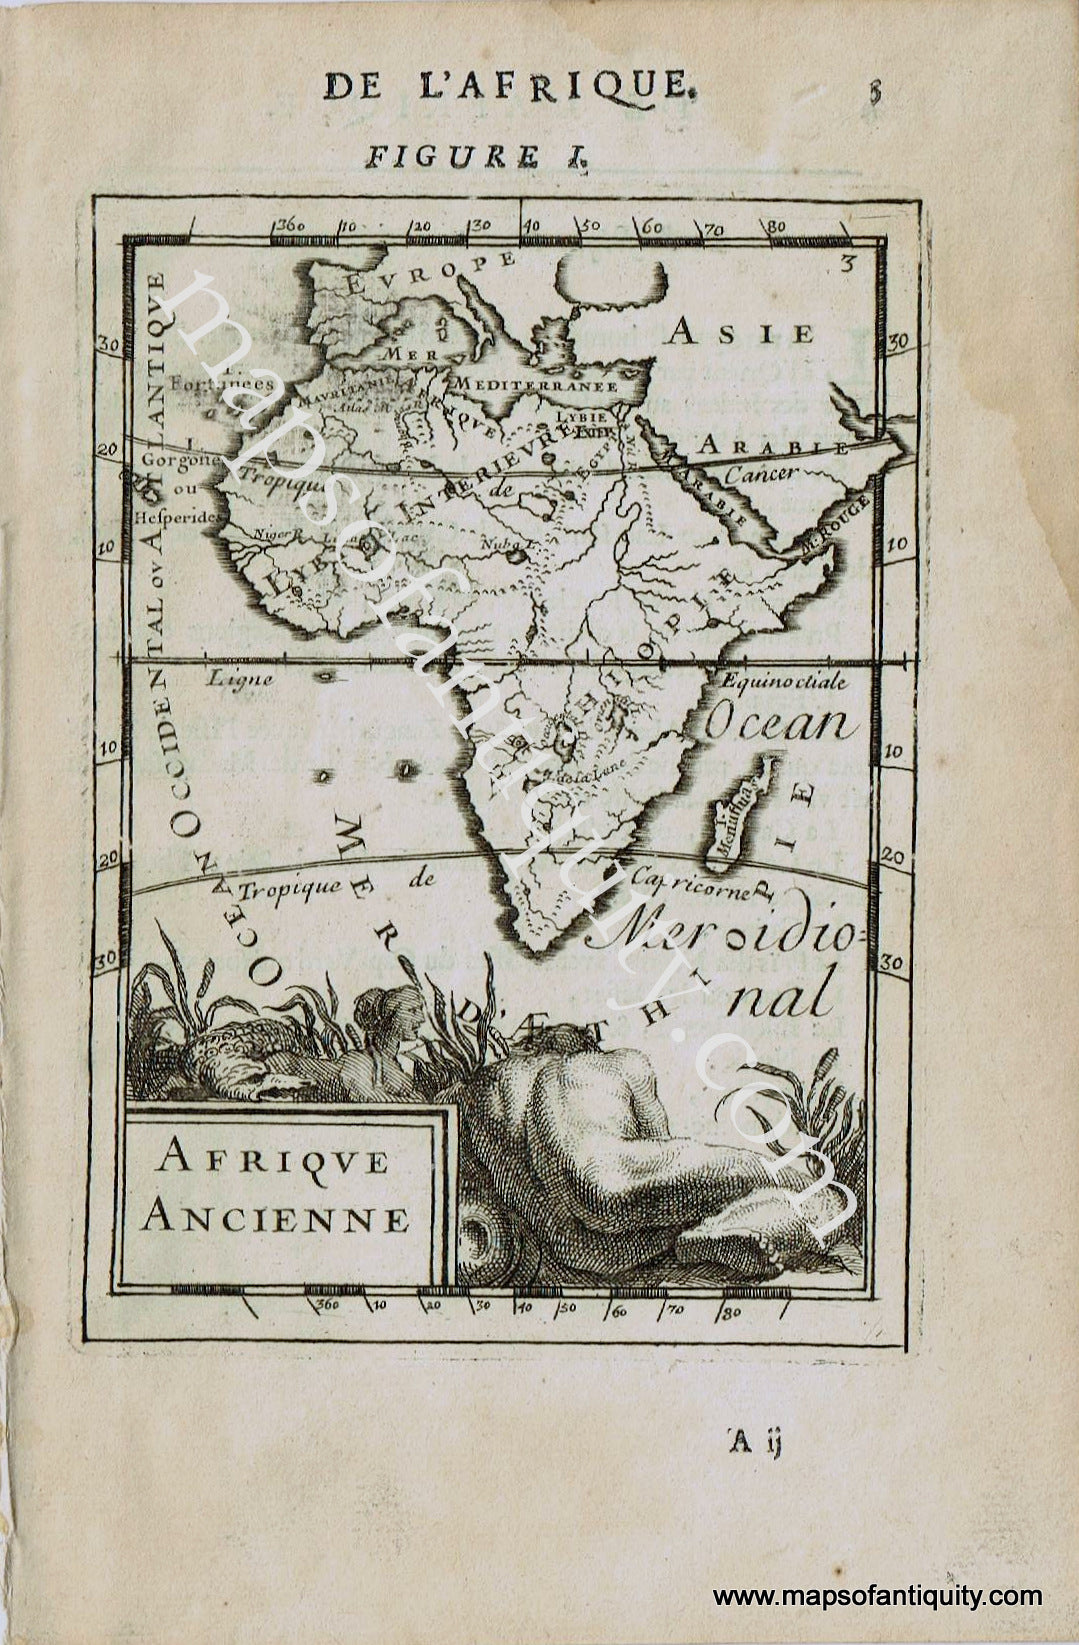 Antique-Black-and-White-Map-Ancient-Africa-Afrique-Ancienne-1683-Mallet-Africa-General-1800s-19th-century-Maps-of-Antiquity